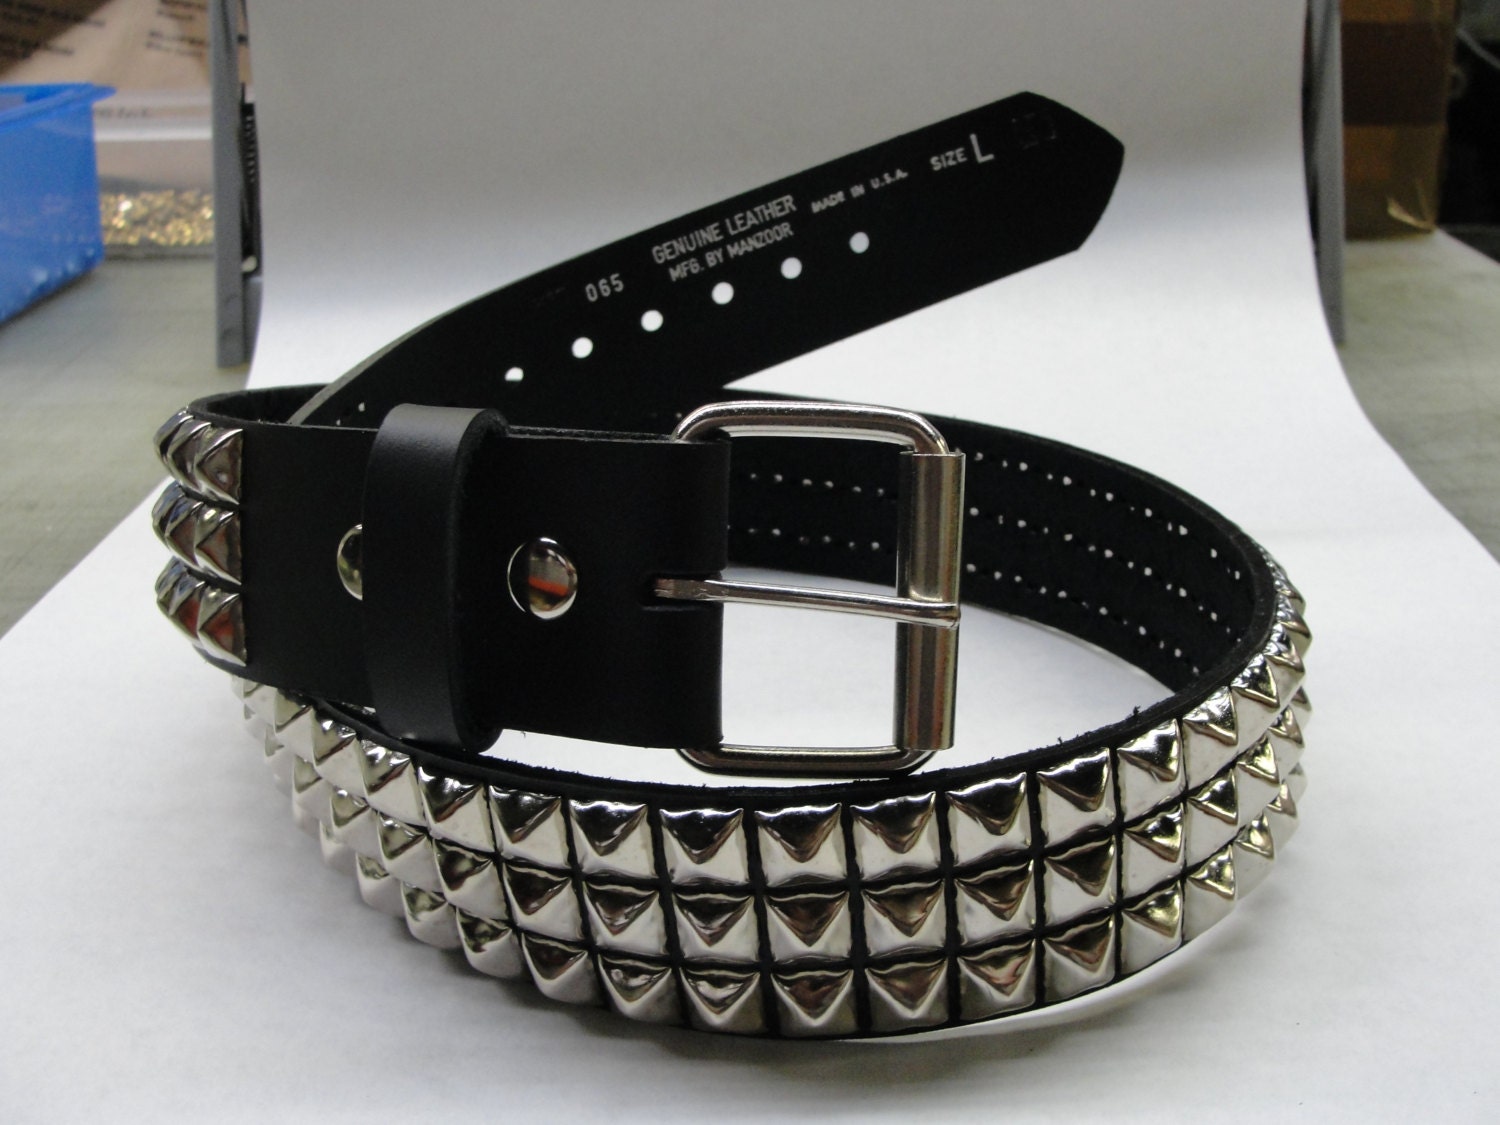 1-3/4 45mm wide Genuine Leather Belt with 3 rows